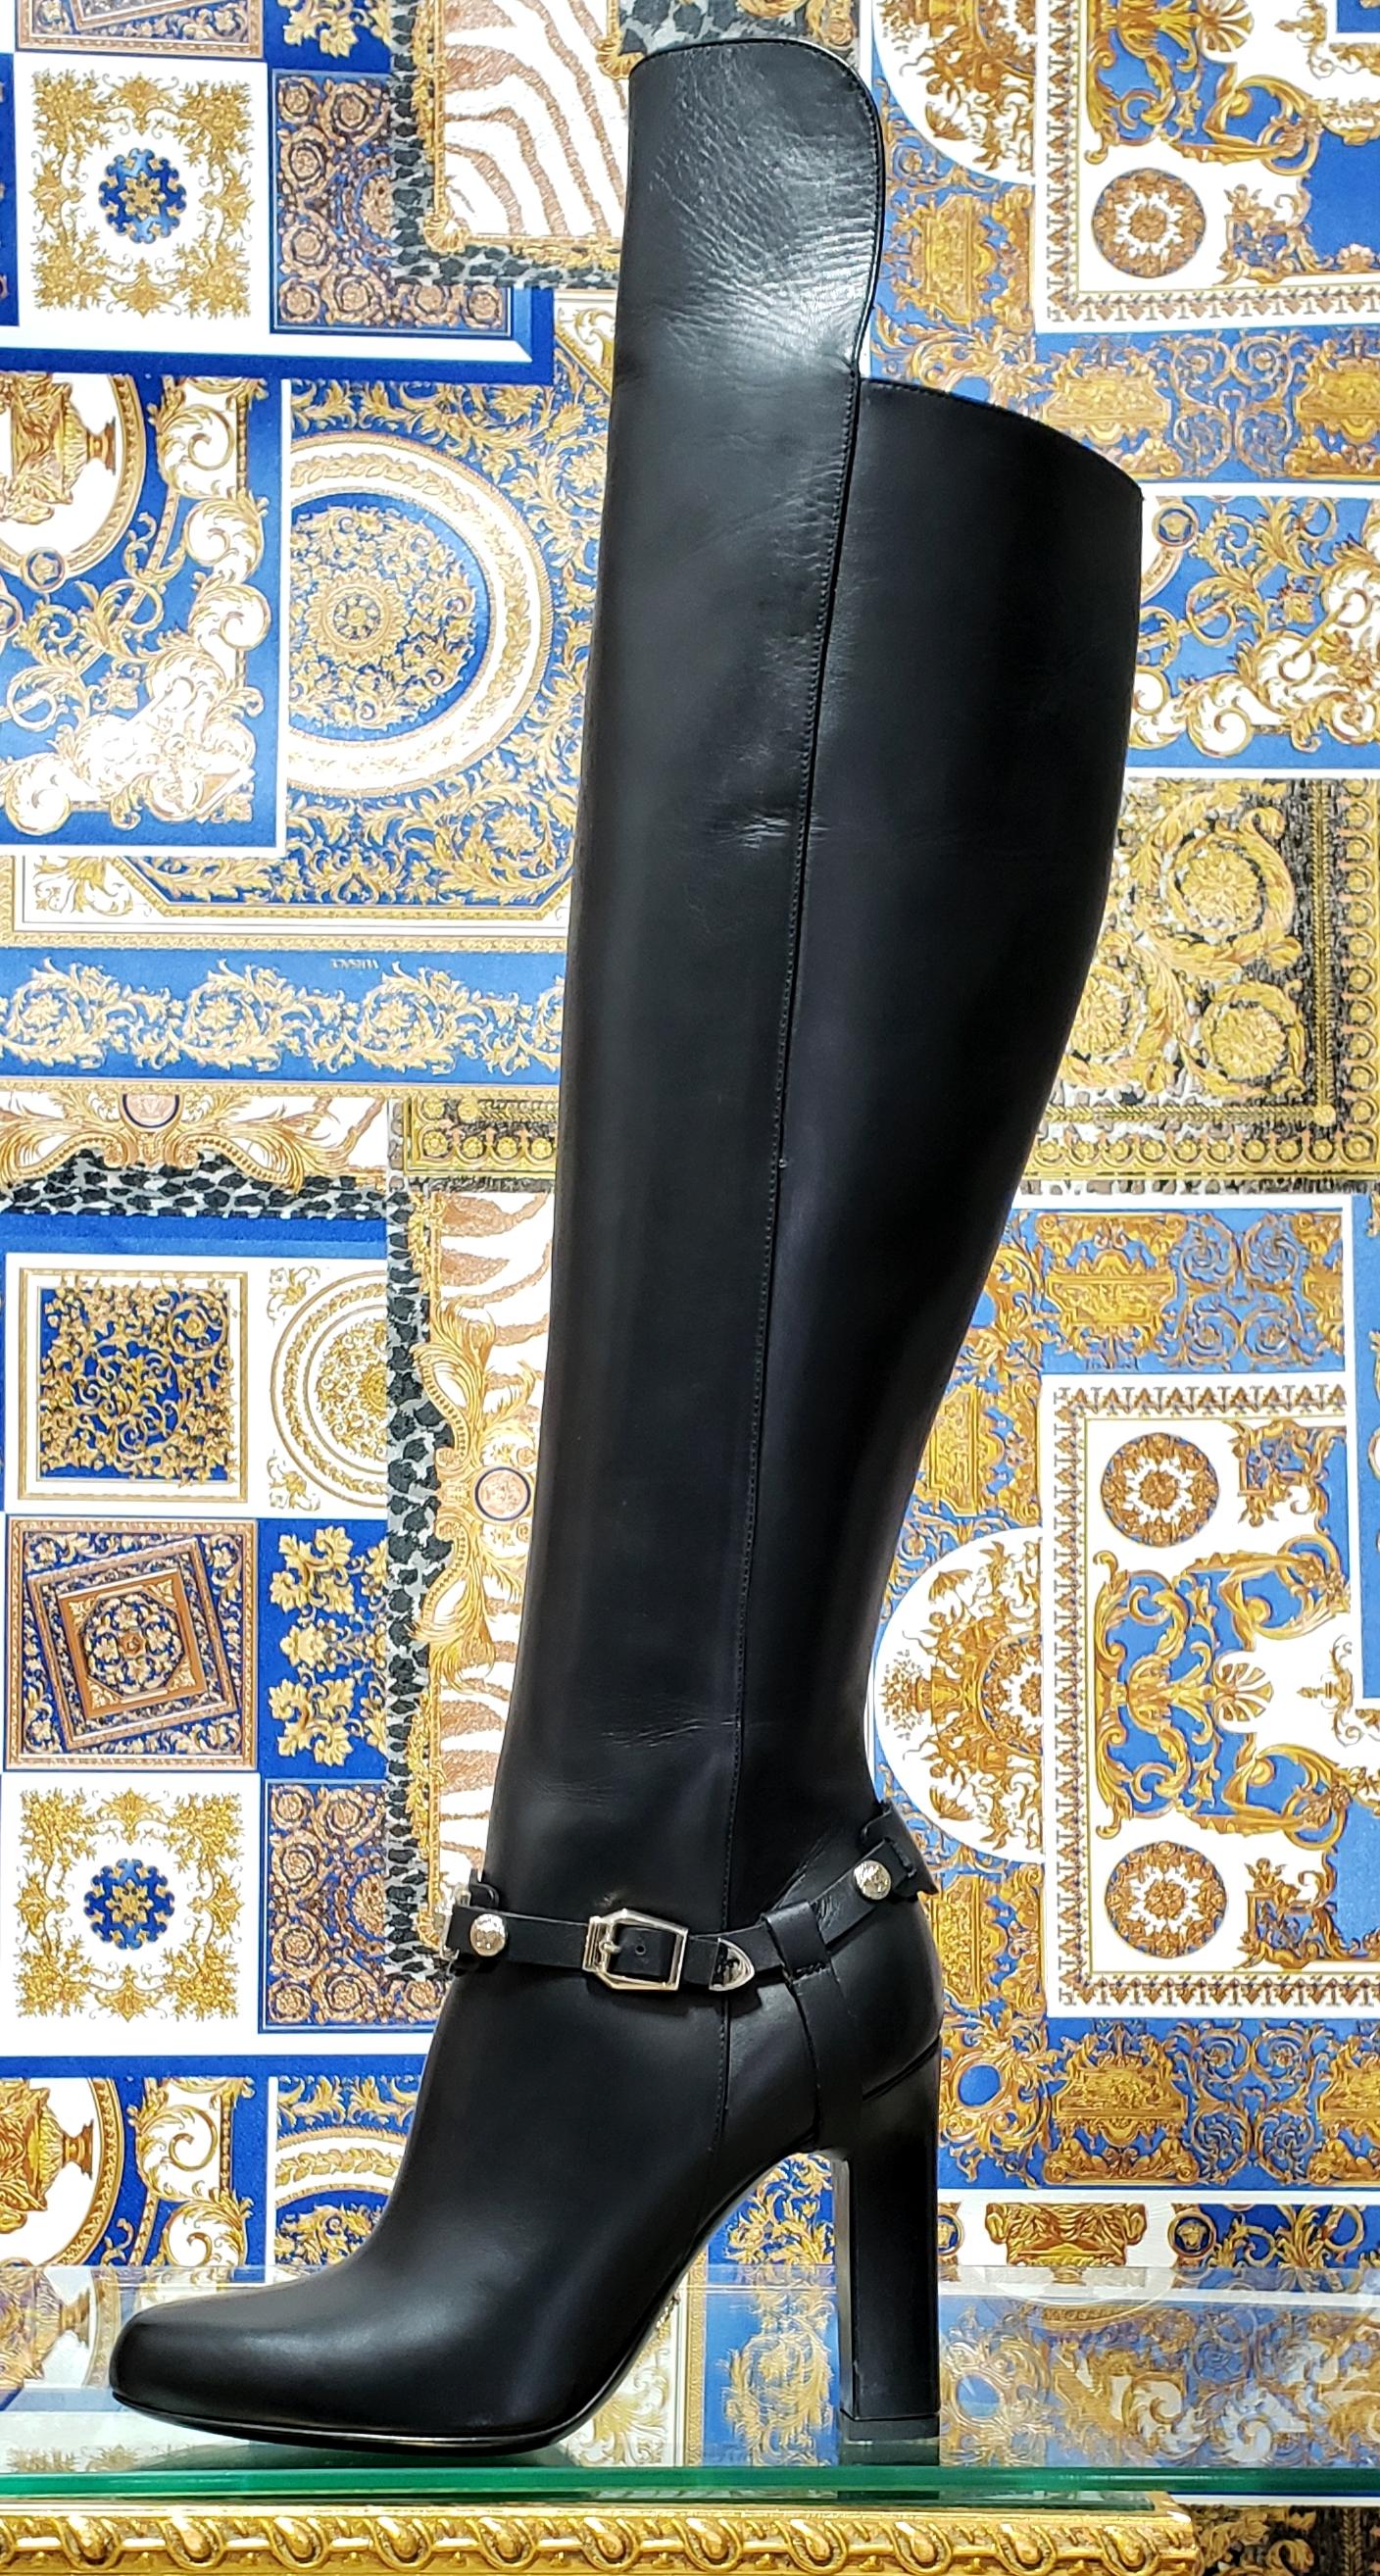 Black VERSACE OVER-THE-KNEE BLACK LEATHER HORSE RIDING STYLE Boots w/HIGH HEELS 35 - 5 For Sale